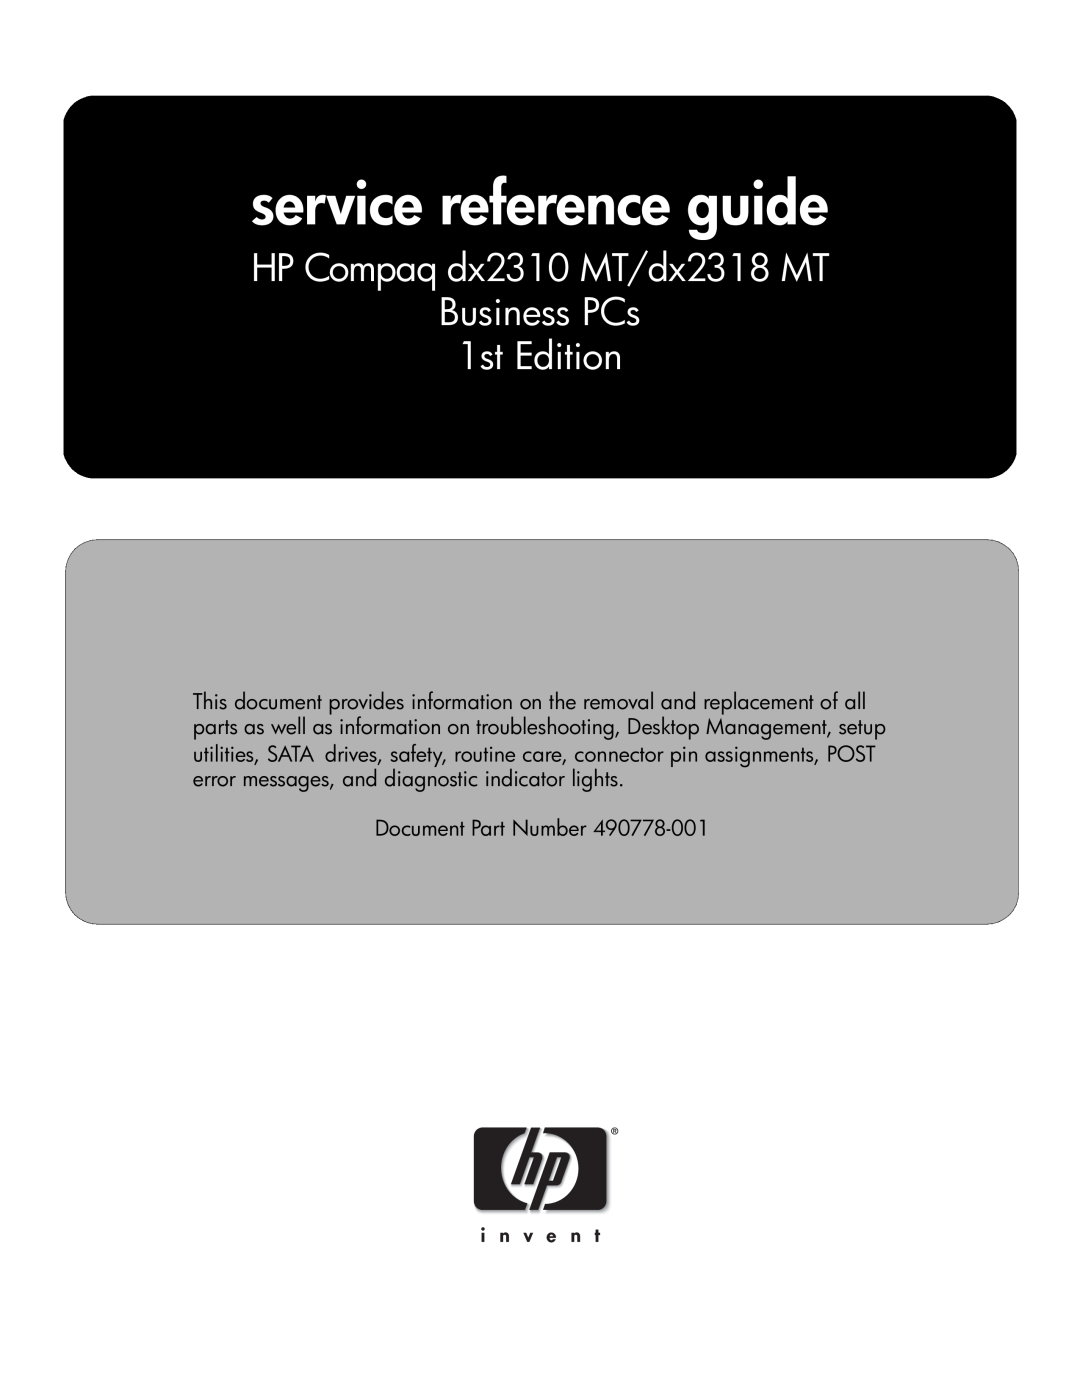 HP manual service reference guide, HP Compaq dx2310 MT/dx2318 MT Business PCs 1st Edition, Document Part Number 